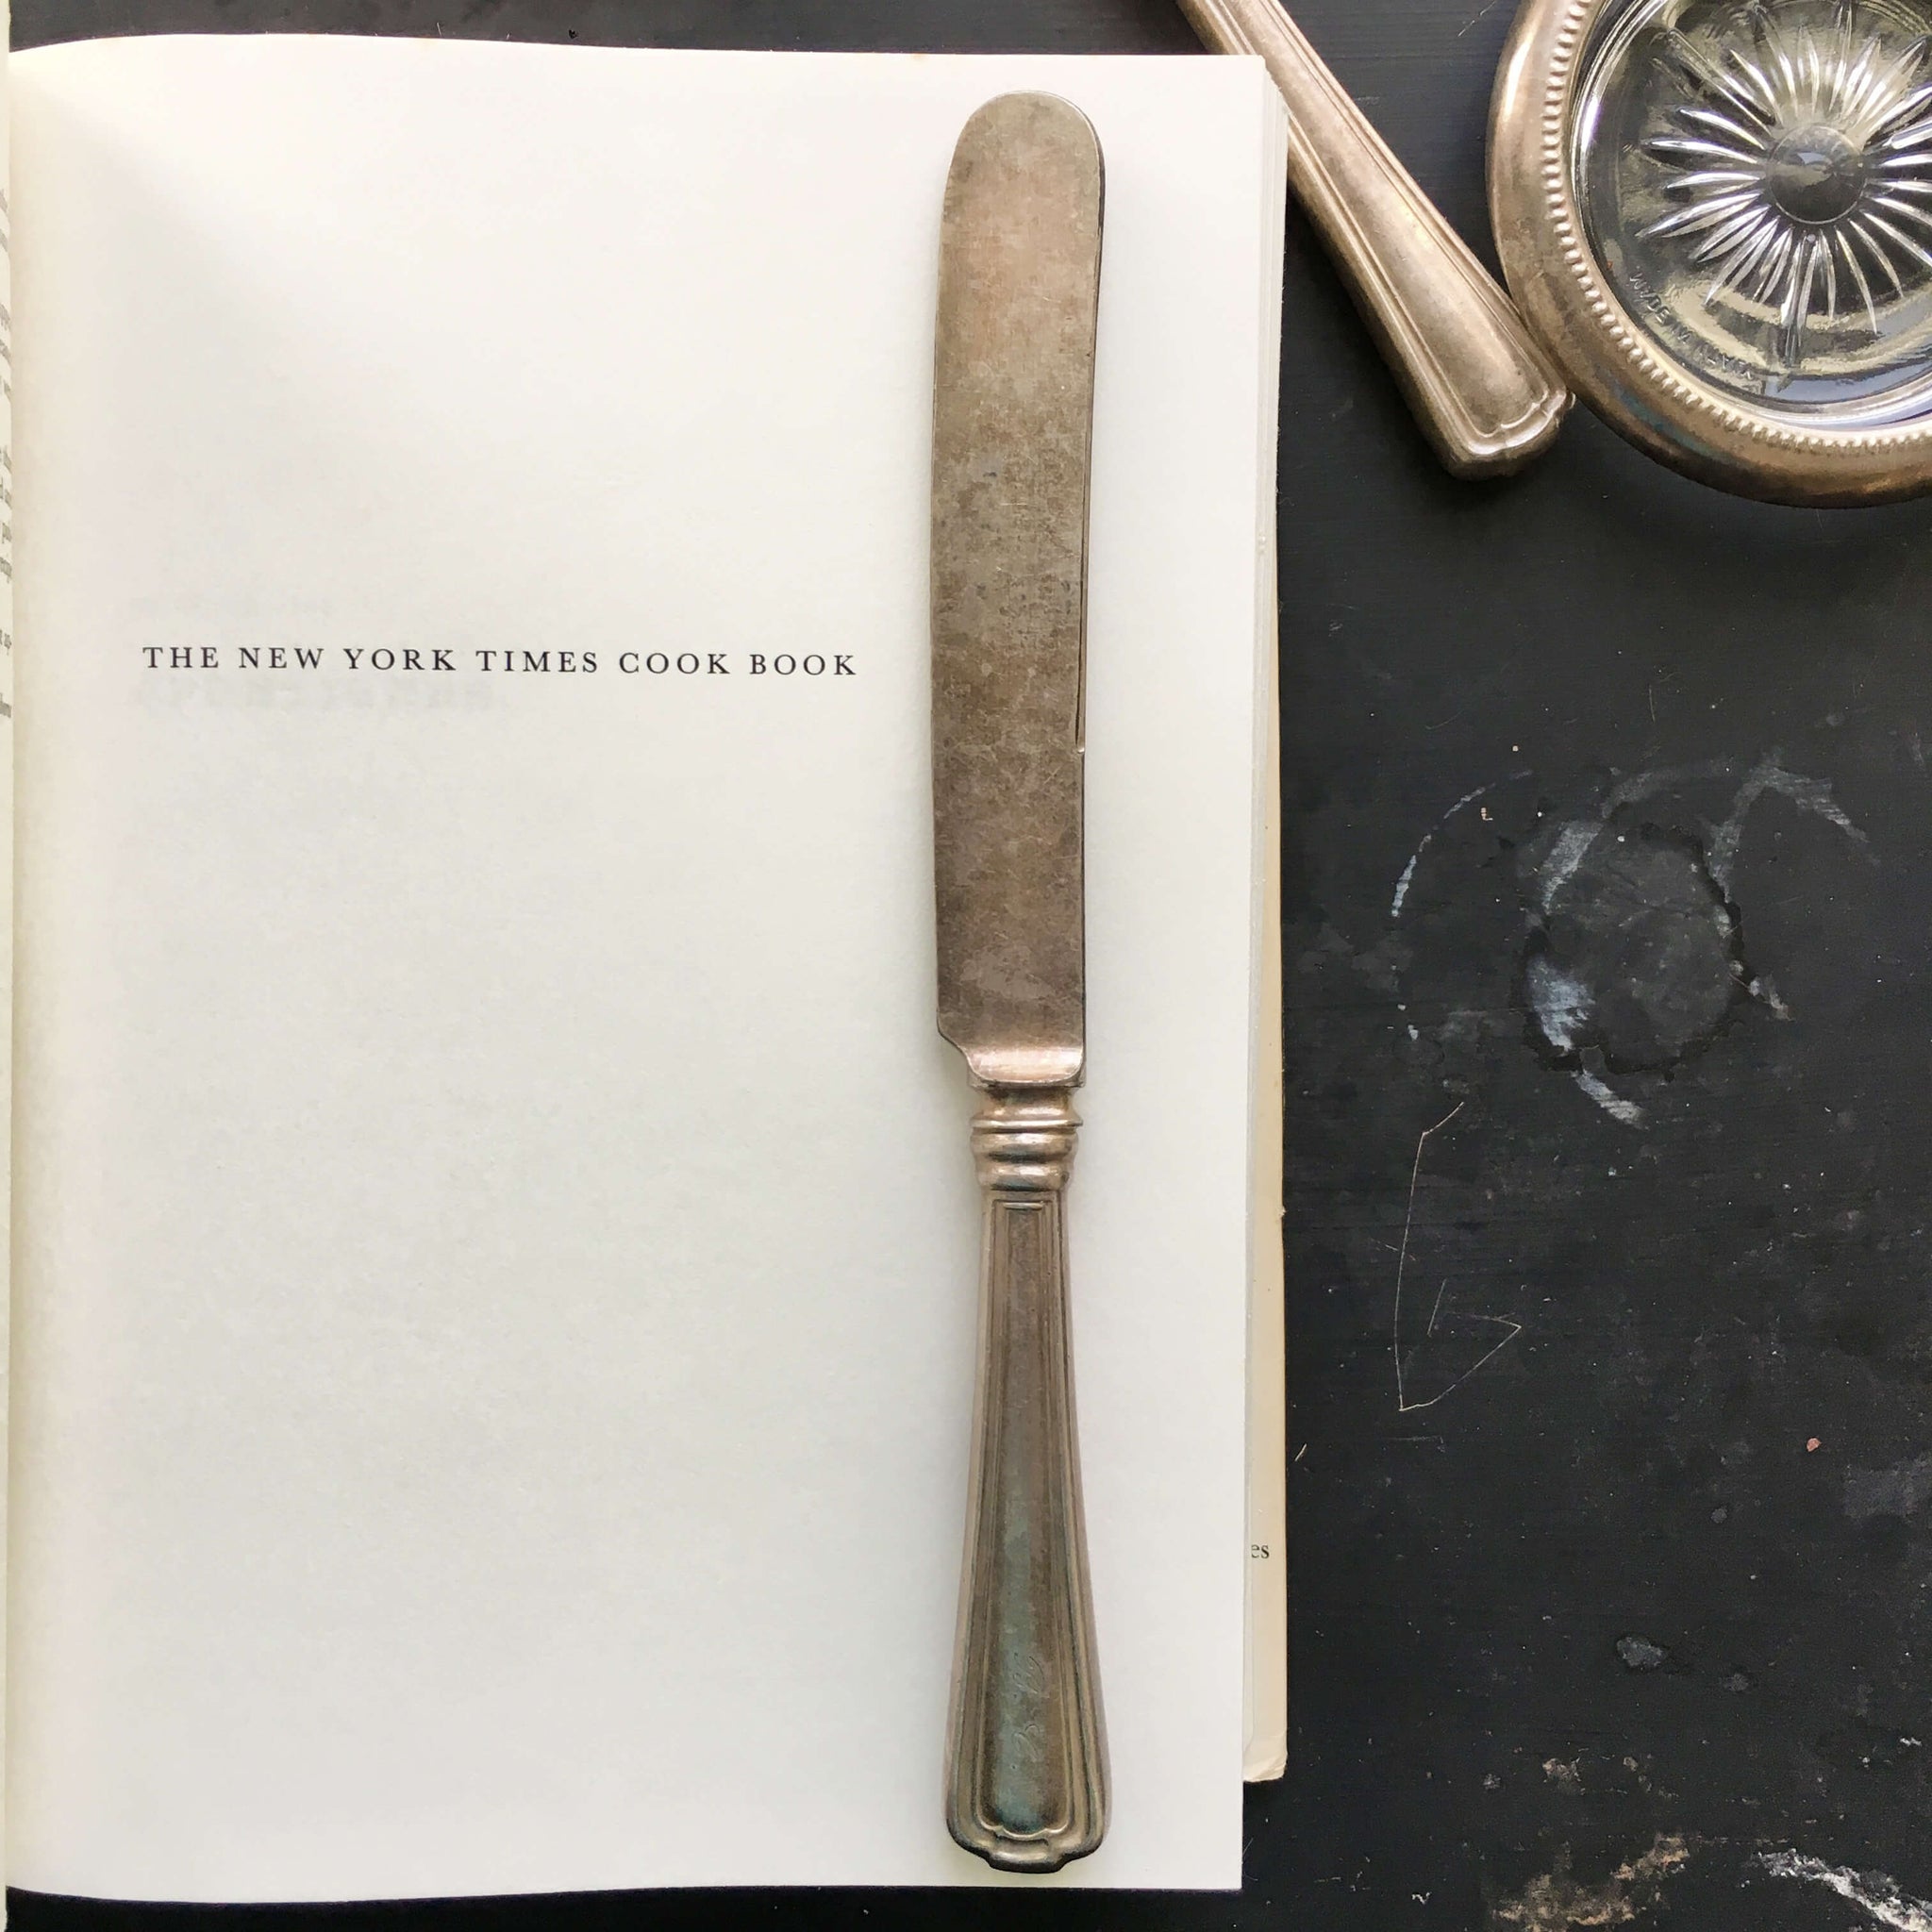 The New York Times Cook Book - Craig Claiborne - 1981 Edition, 27th Printing